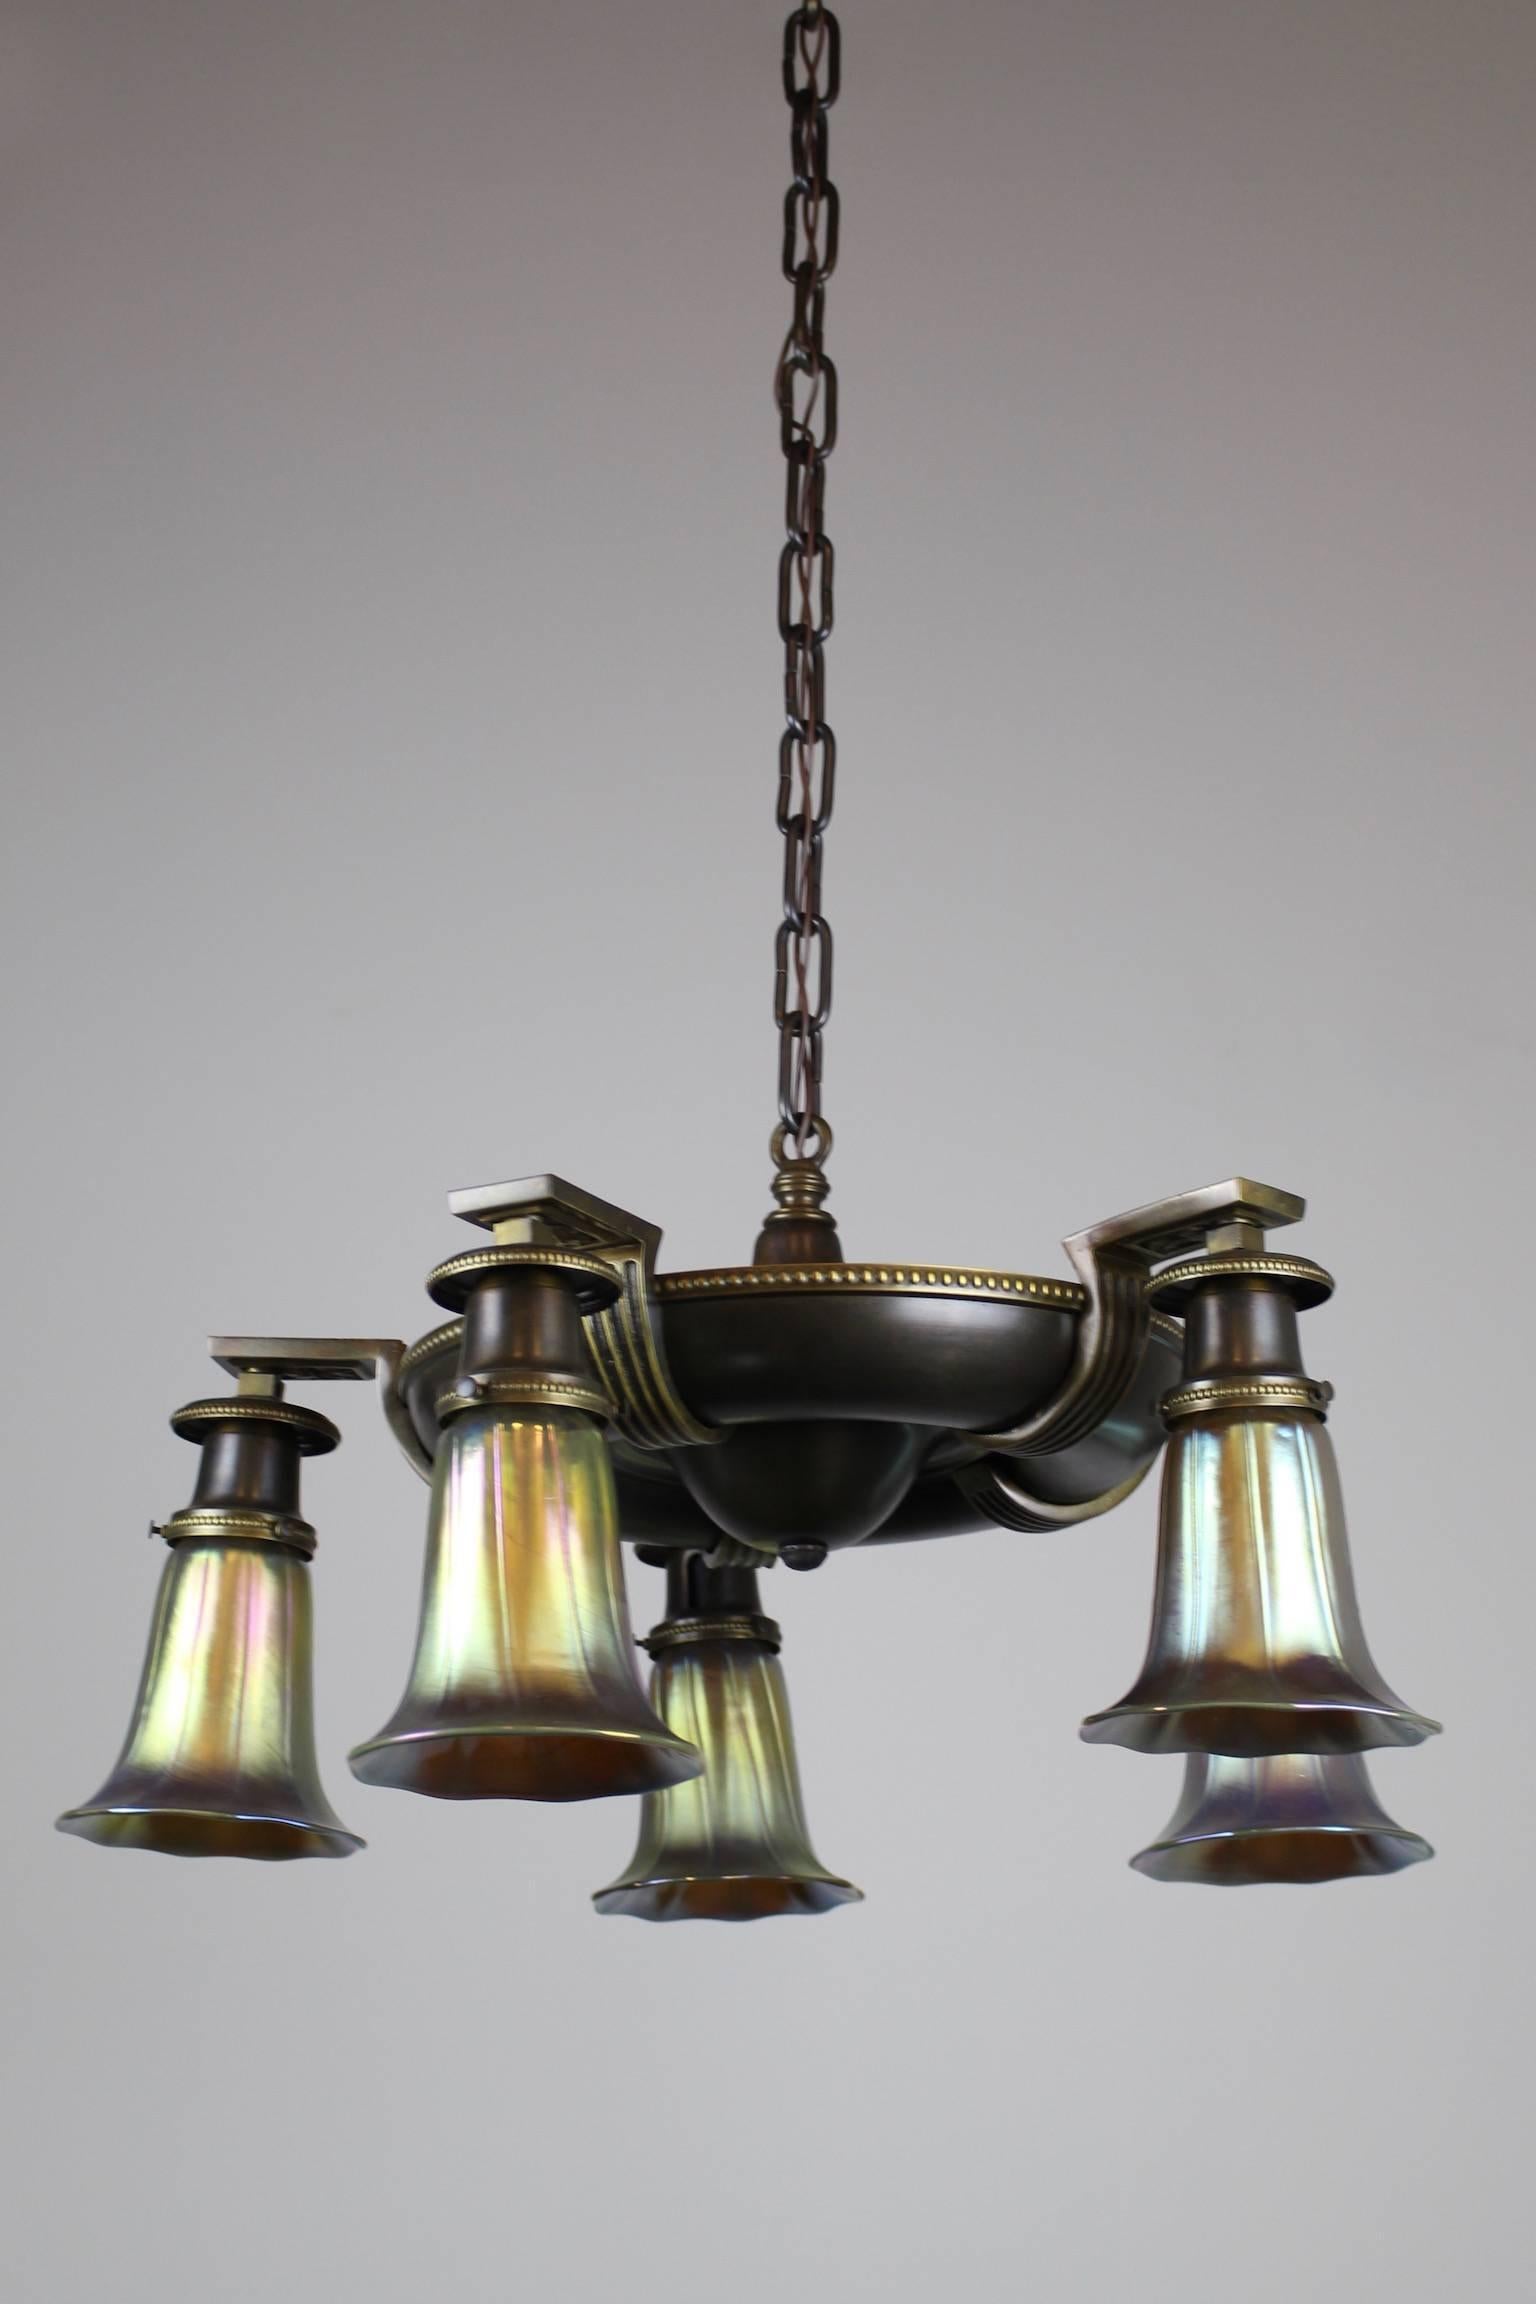 This is a lovely five-arm Classical Revival pan fixture by Shapiro & Aronson, circa 1925. This fixture has refined Neo-Classical lines, with two-tone brass detail. Fitted with five aurene art glass shades, made in the manner of Steuben. Cleaned,